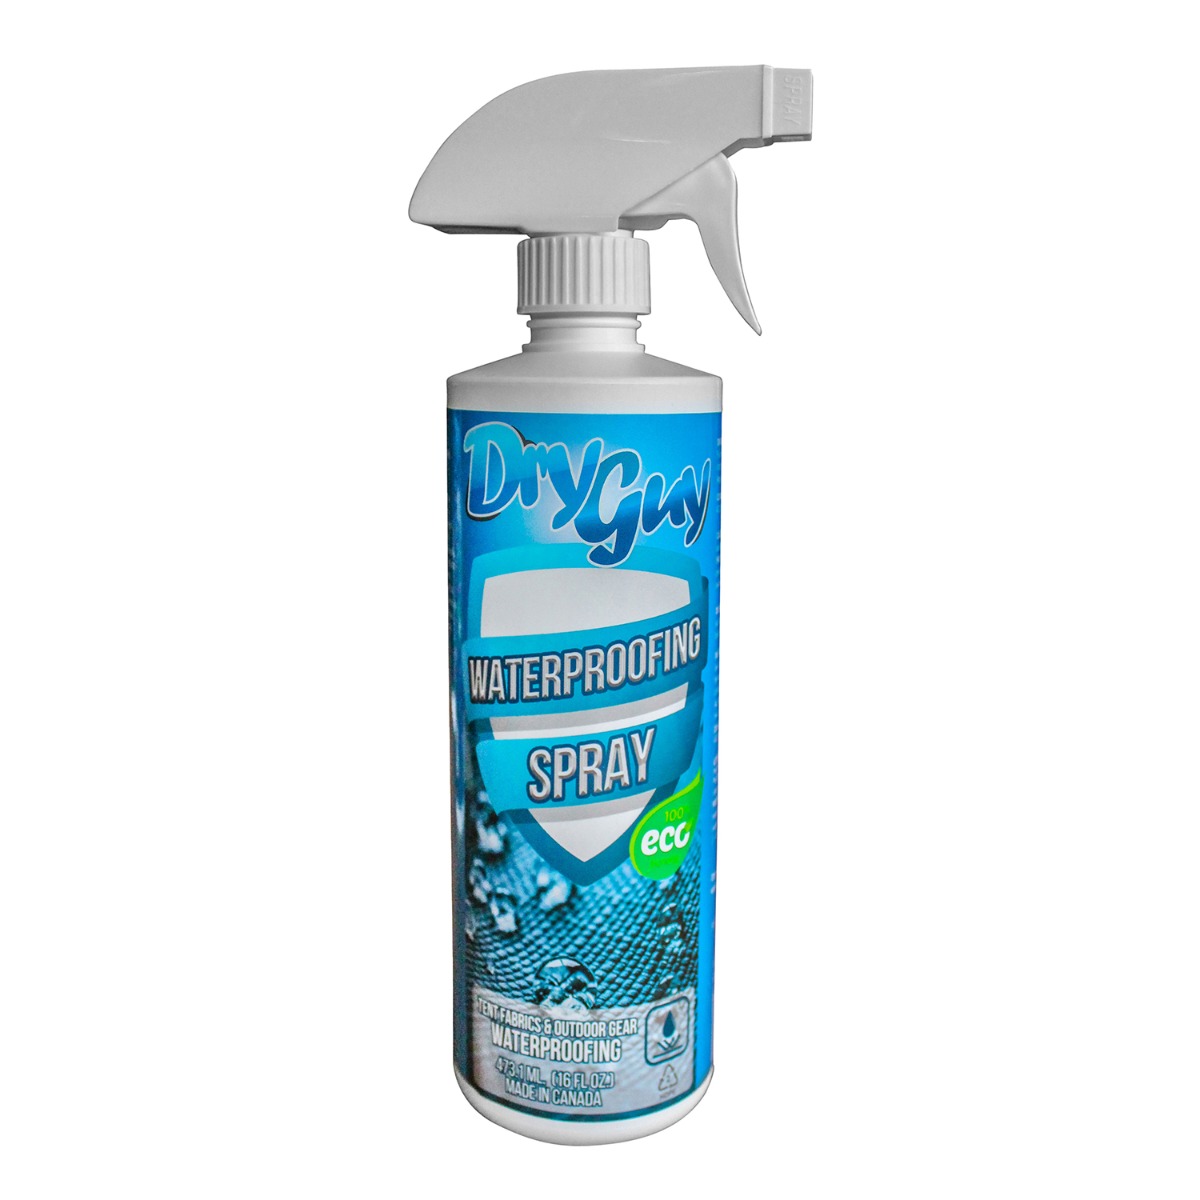 Fabric Waterproof Spray Heavy Duty Waterproofing Spray Fabric Protector  Spray and Repellent for Outdoor Marine Canvas Boat Tops, Vinyl Seats, Tent Water  Proof, Clothing Boots, Jacket and Clothes price in Saudi Arabia